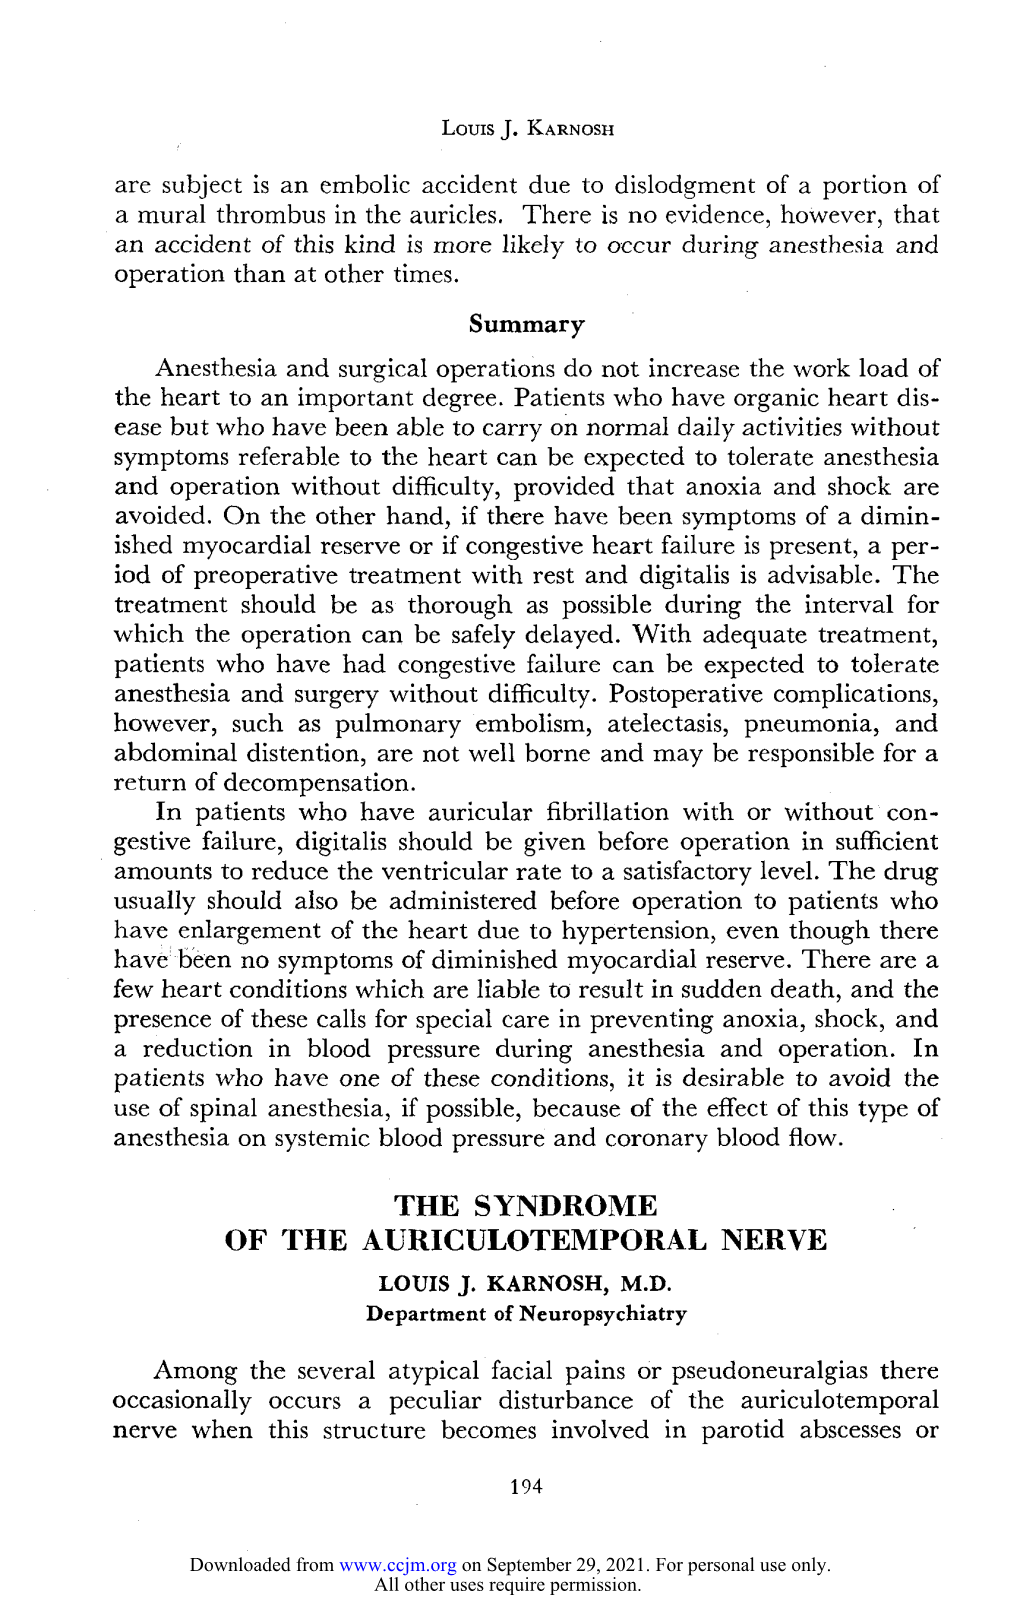 The Syndrome of the Auriculotemporal Nerve Louis J